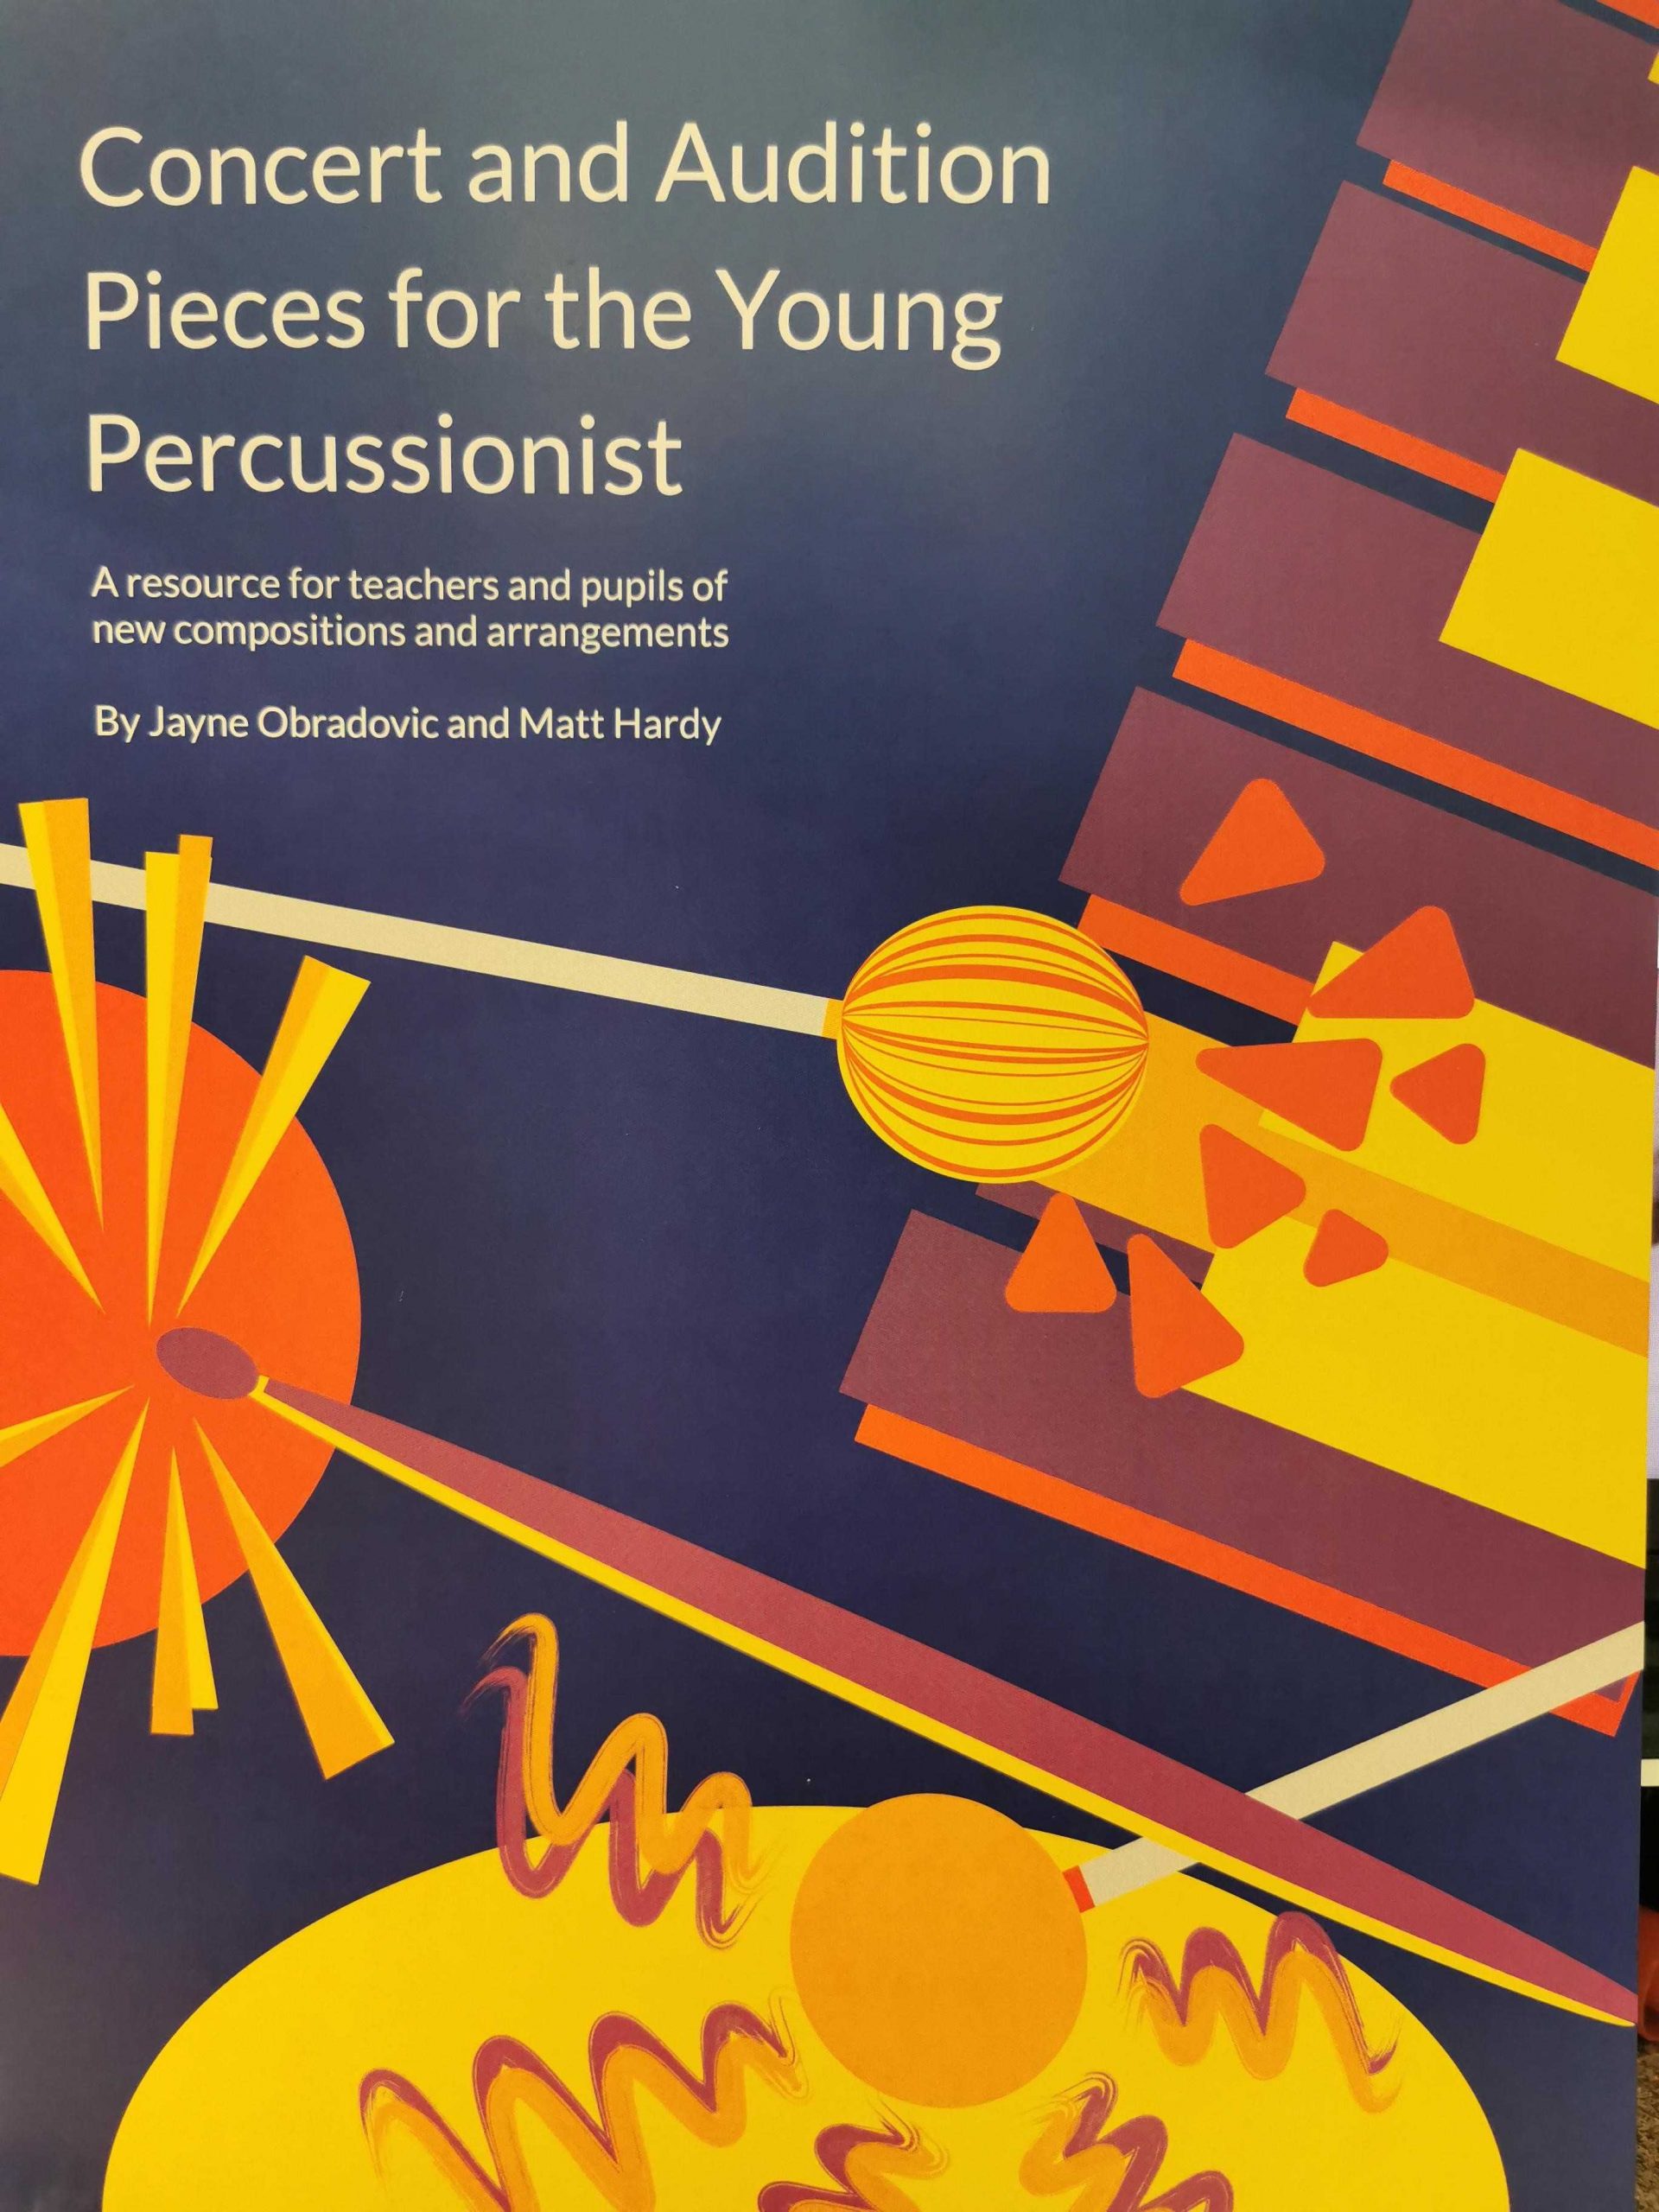 Concert and Audition pieces for the Young Percussionist by Matthew Hardy and Jayne Obradovic